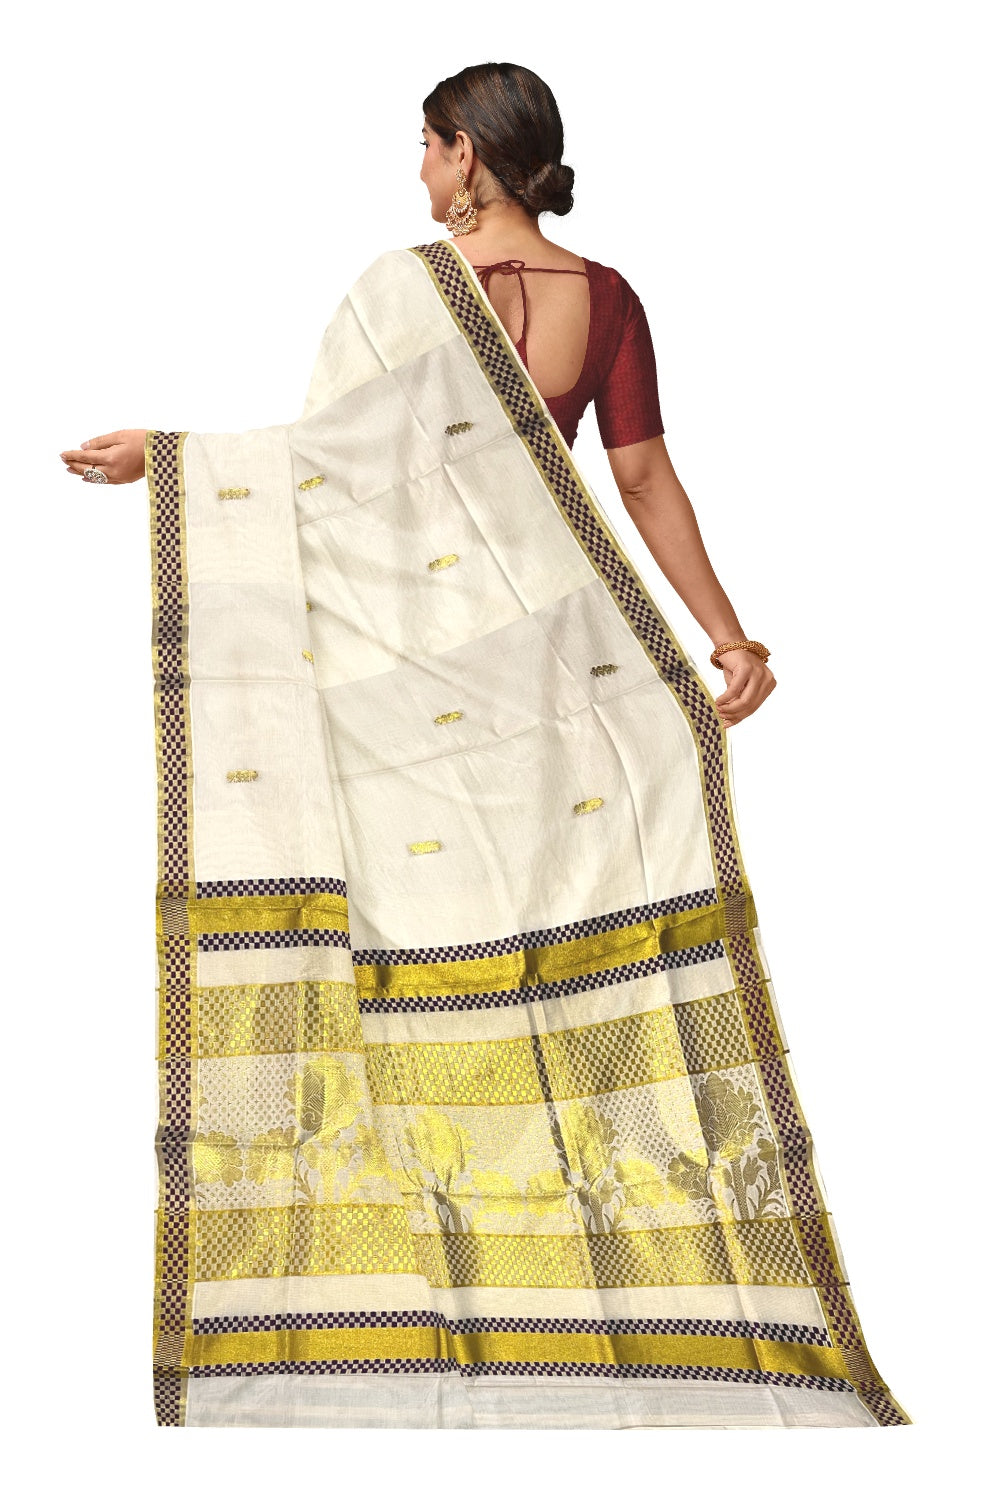 Pure Cotton Kerala Saree with Kasavu Woven Floral Patterns on Body and Purple Golden Border